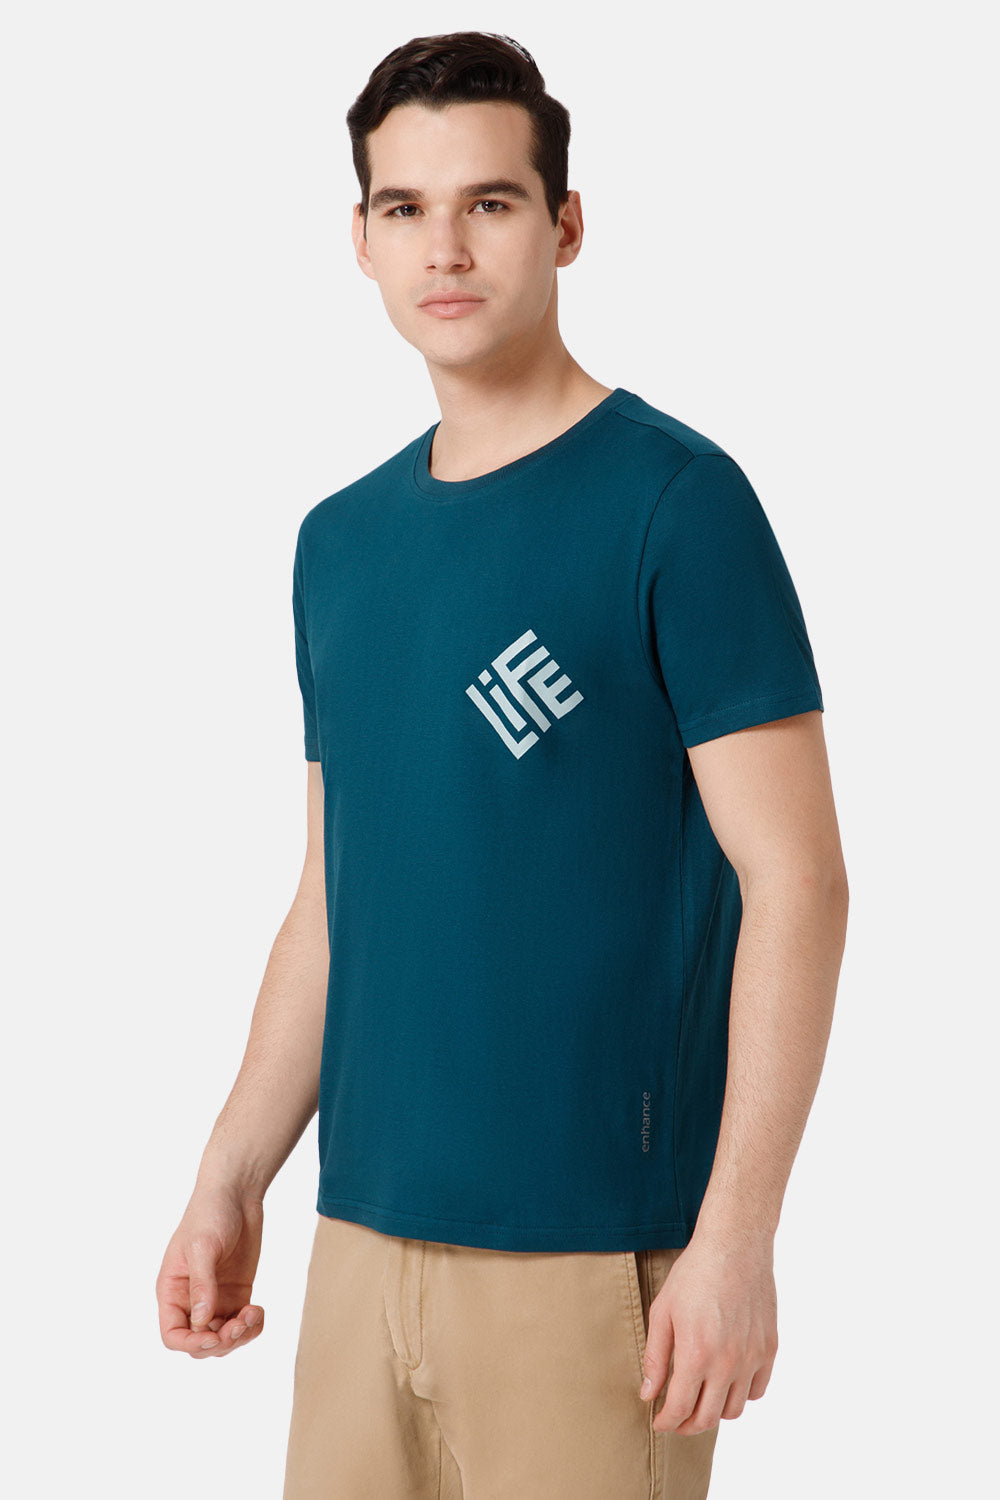 Enhance Printed Crew Neck Men's Casual T-Shirts - Teal - TS23